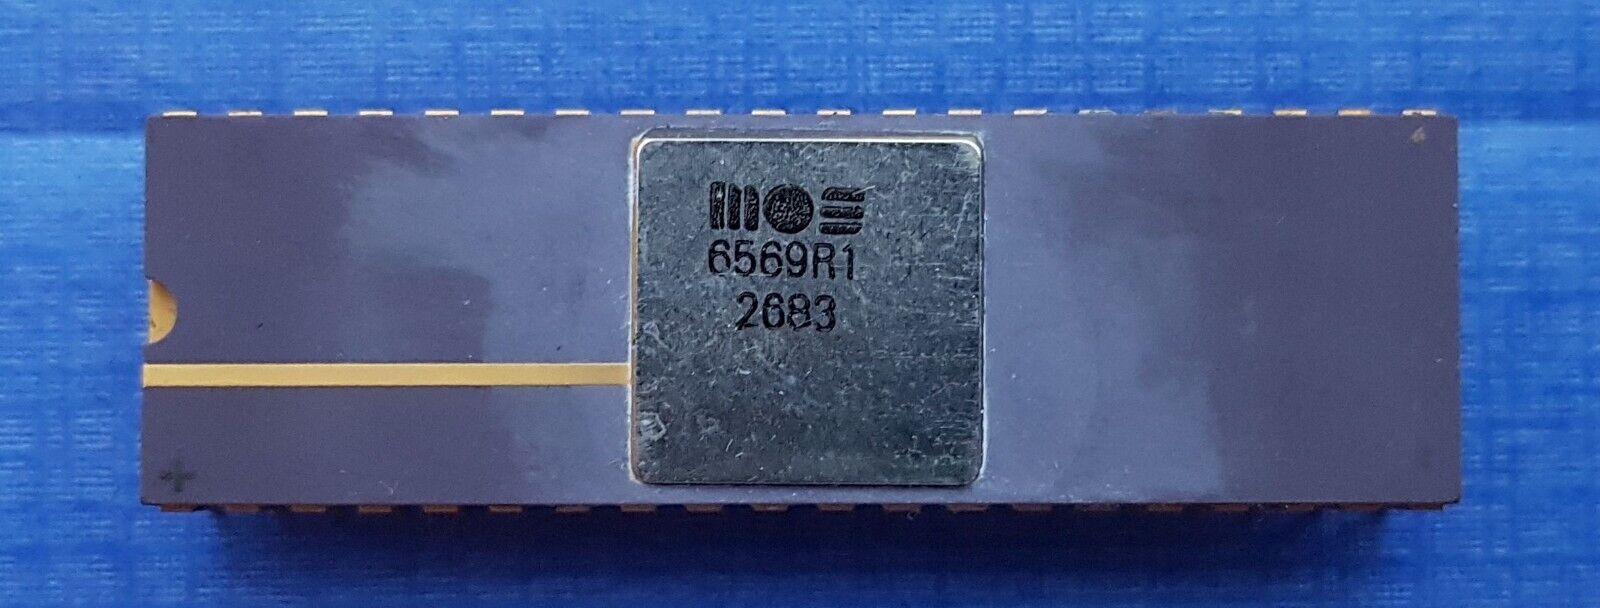 MOS 6569R1 | MOS 6569 R1 Ceramic-Gold VIC II PAL Video Chip for Commodore 64